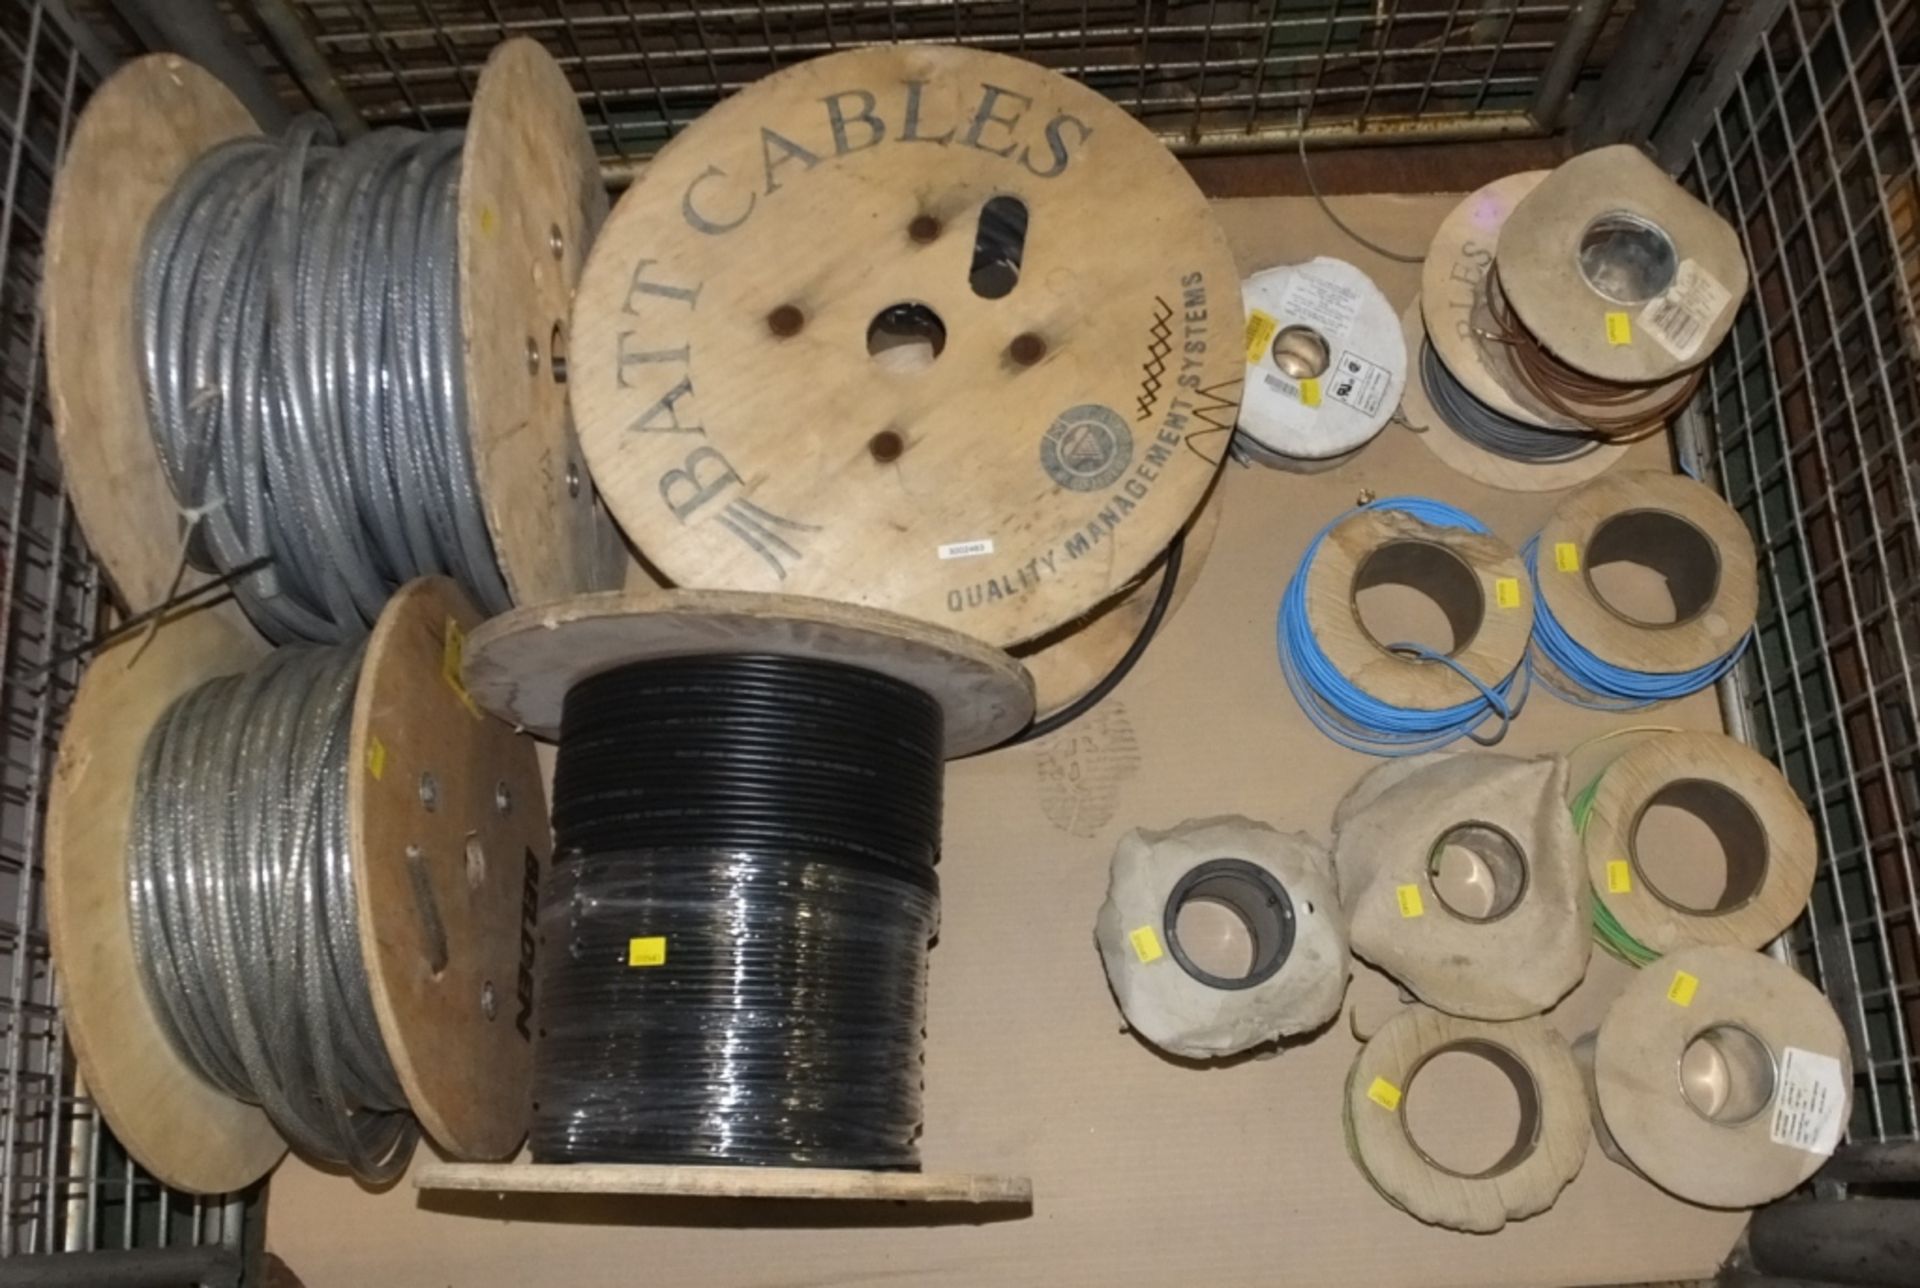 Electrical Cable - Various Sizes & Unknown lengths